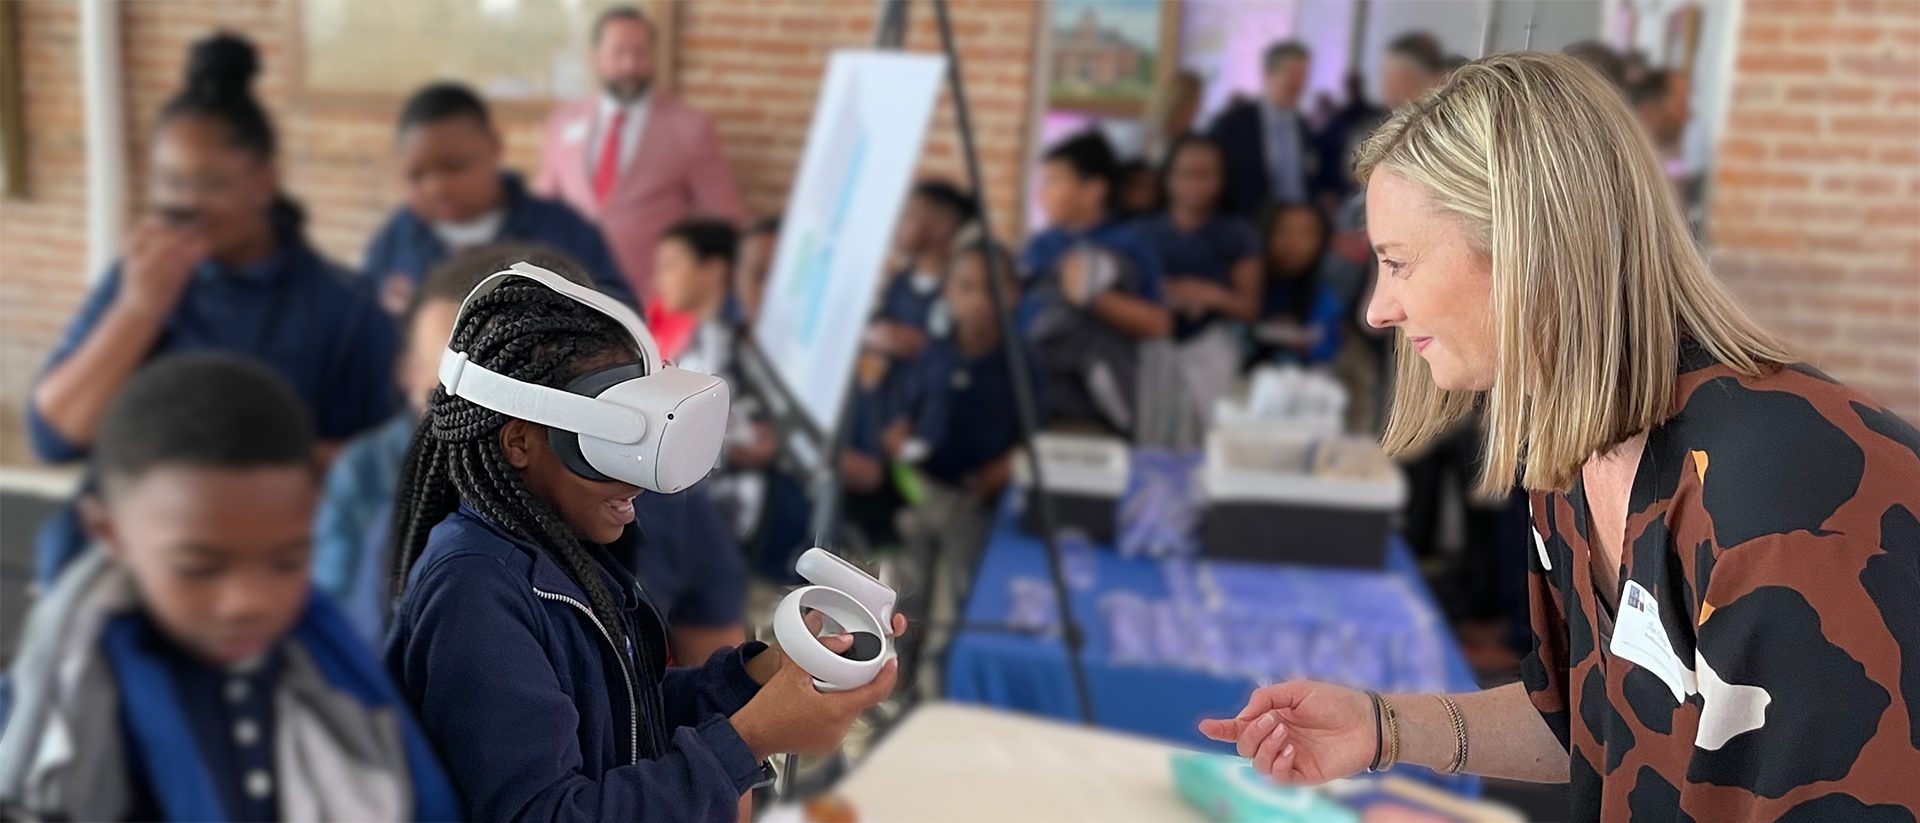 Image showing Multistudio's Lexi Tengco helping a little girl use virtual reality goggles to view the proposed design for the Lemann Building renovation.